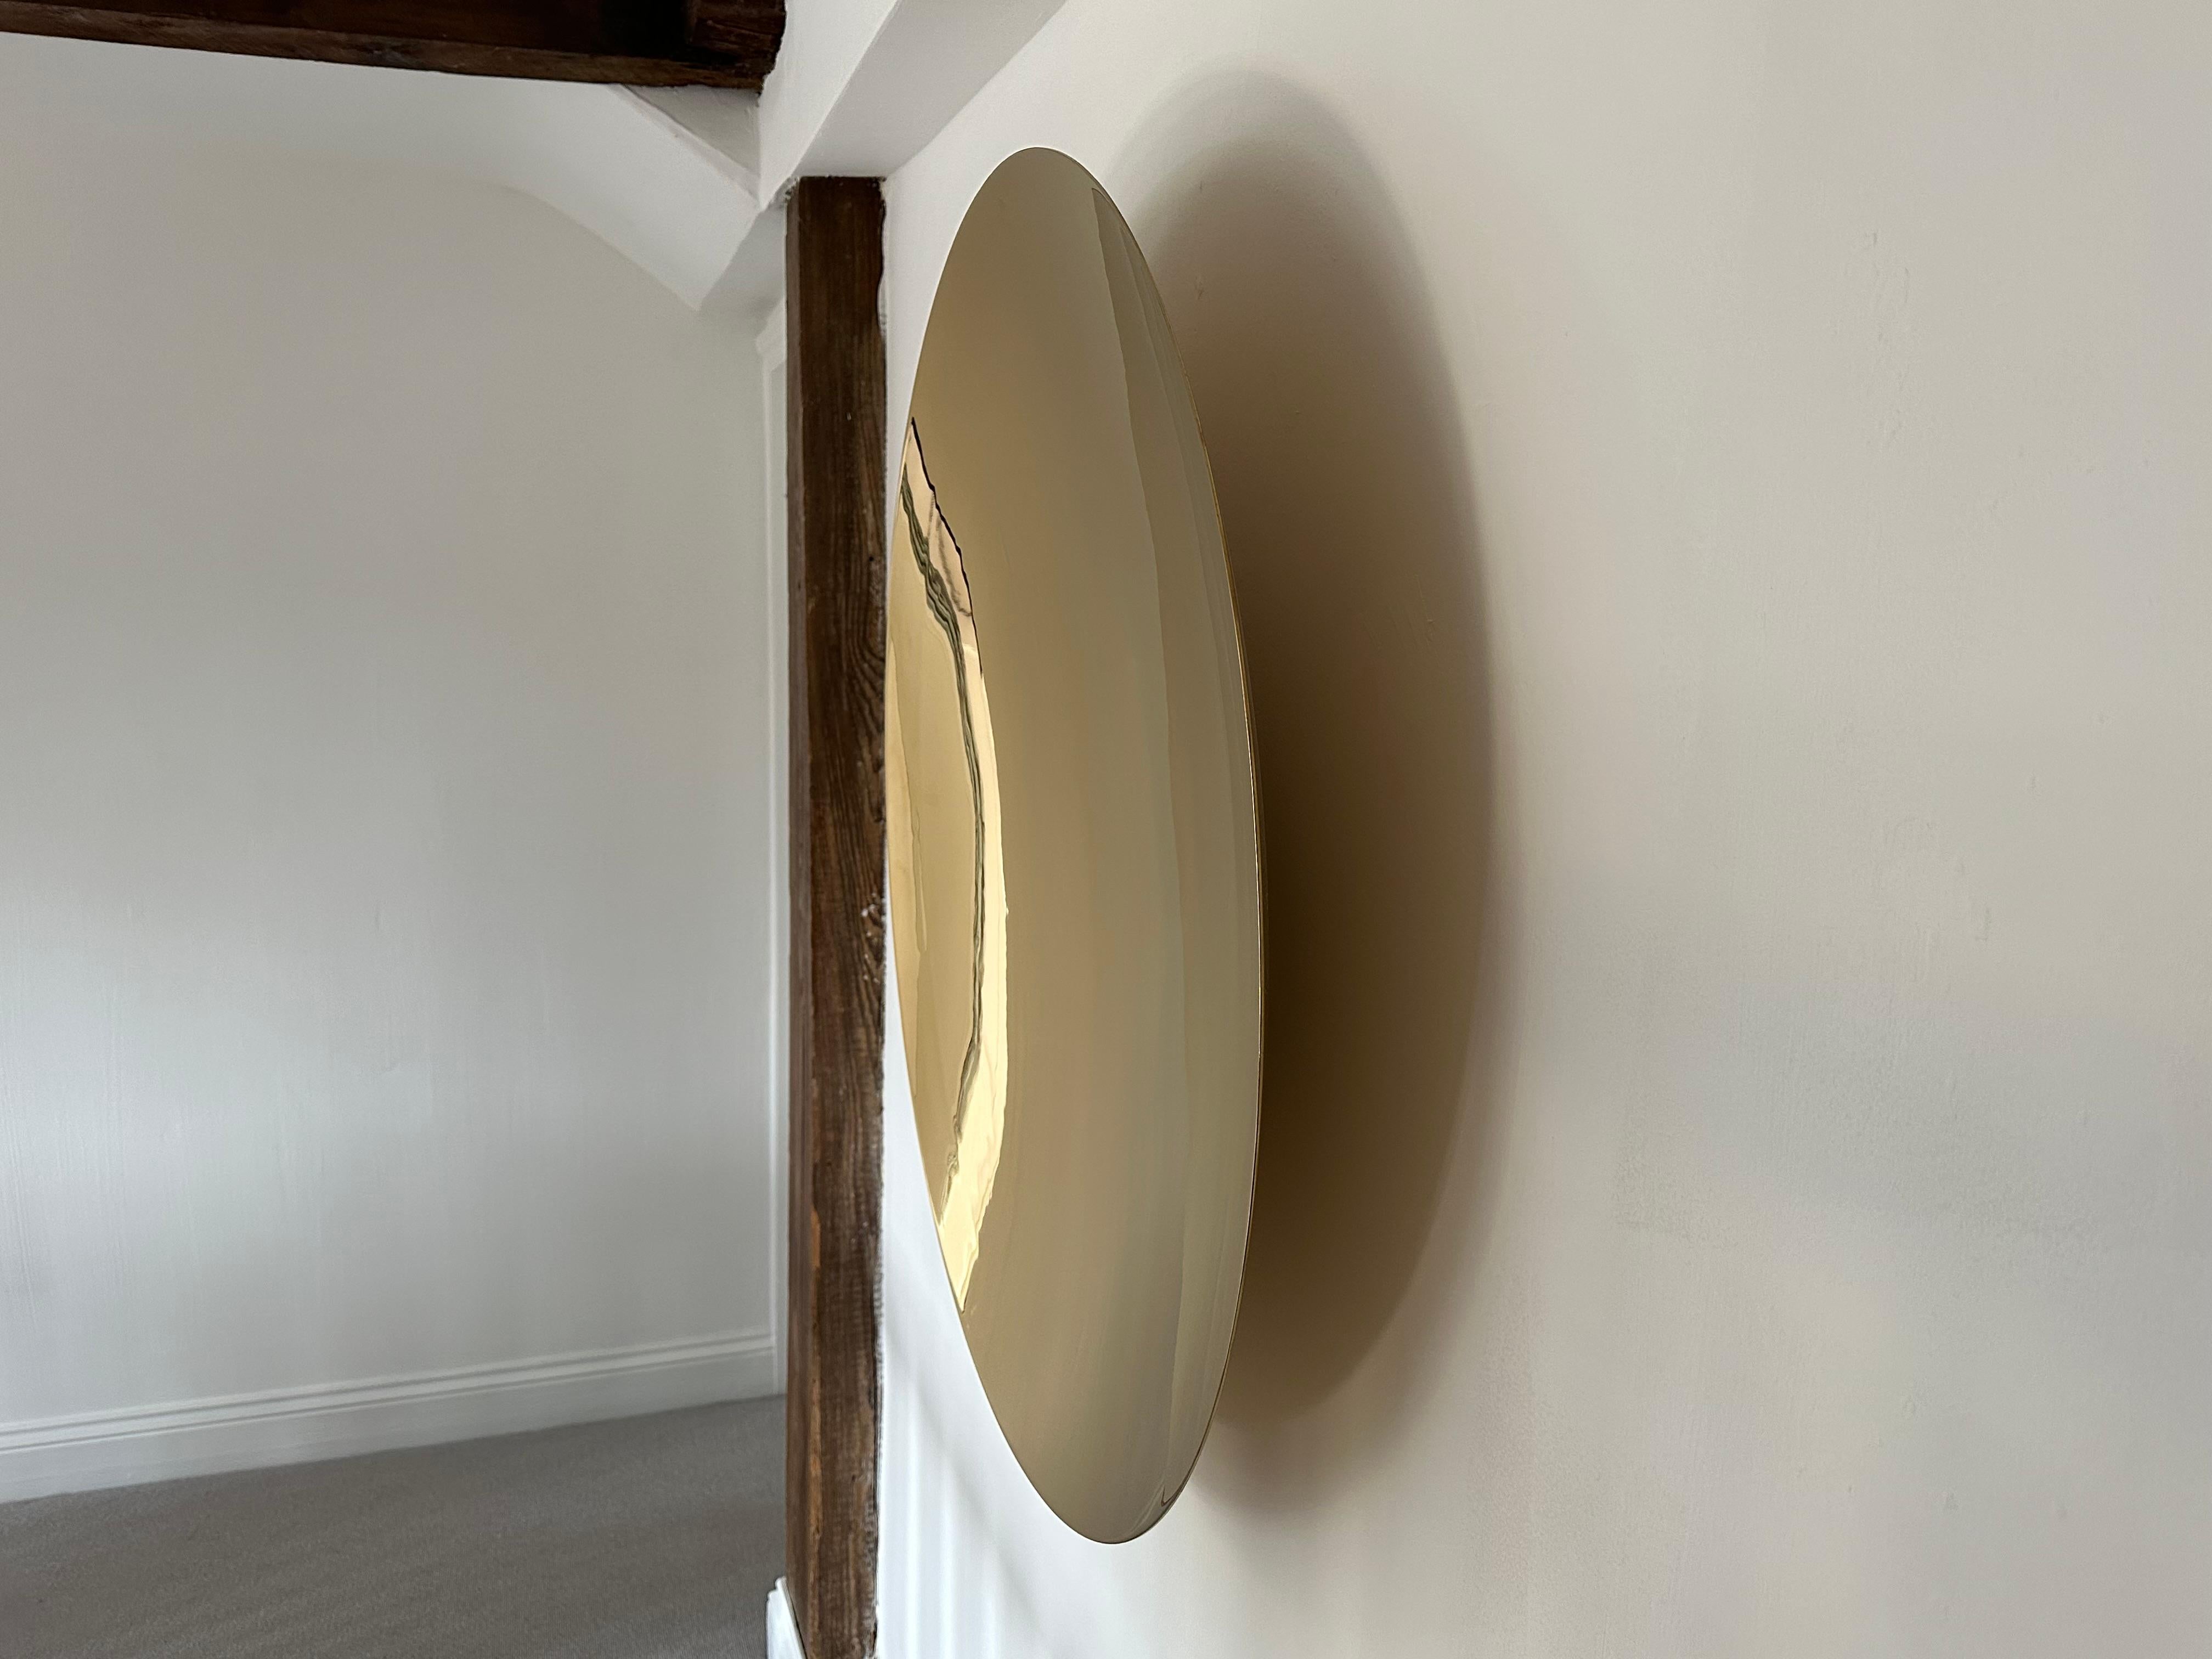 The concave mirror itself creates unique bright reflections which in turn creates the illusion of space. Please note that the image is upside down.

The mirror is fabricated out of 3mm 304 stainless steel. It's formed and then polished. After